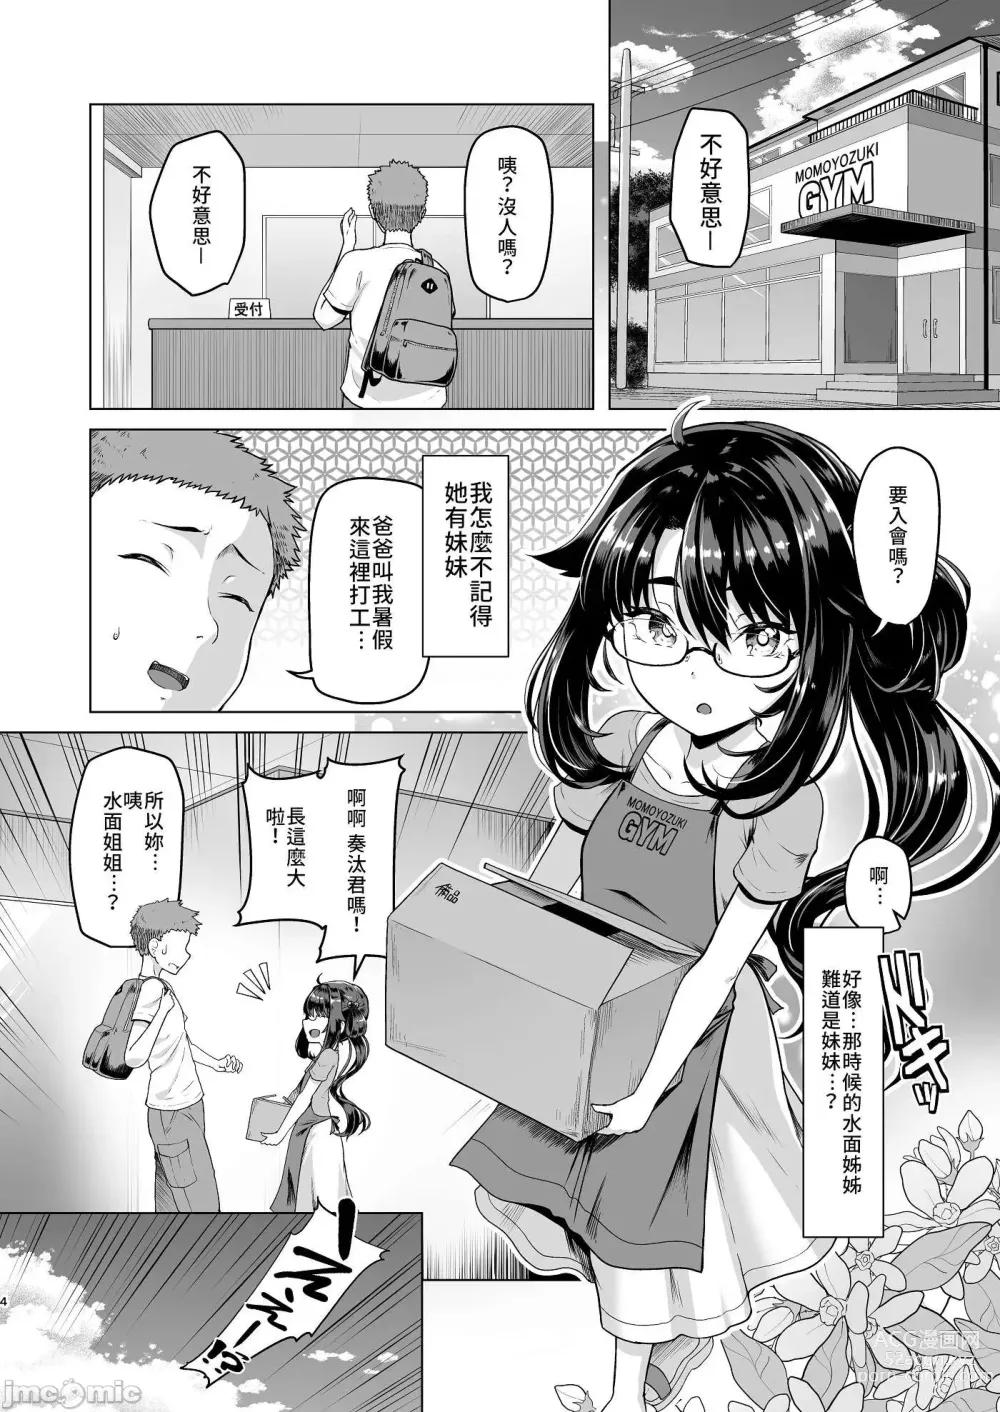 Page 3 of doujinshi 僕だけが知っている深夜の水面